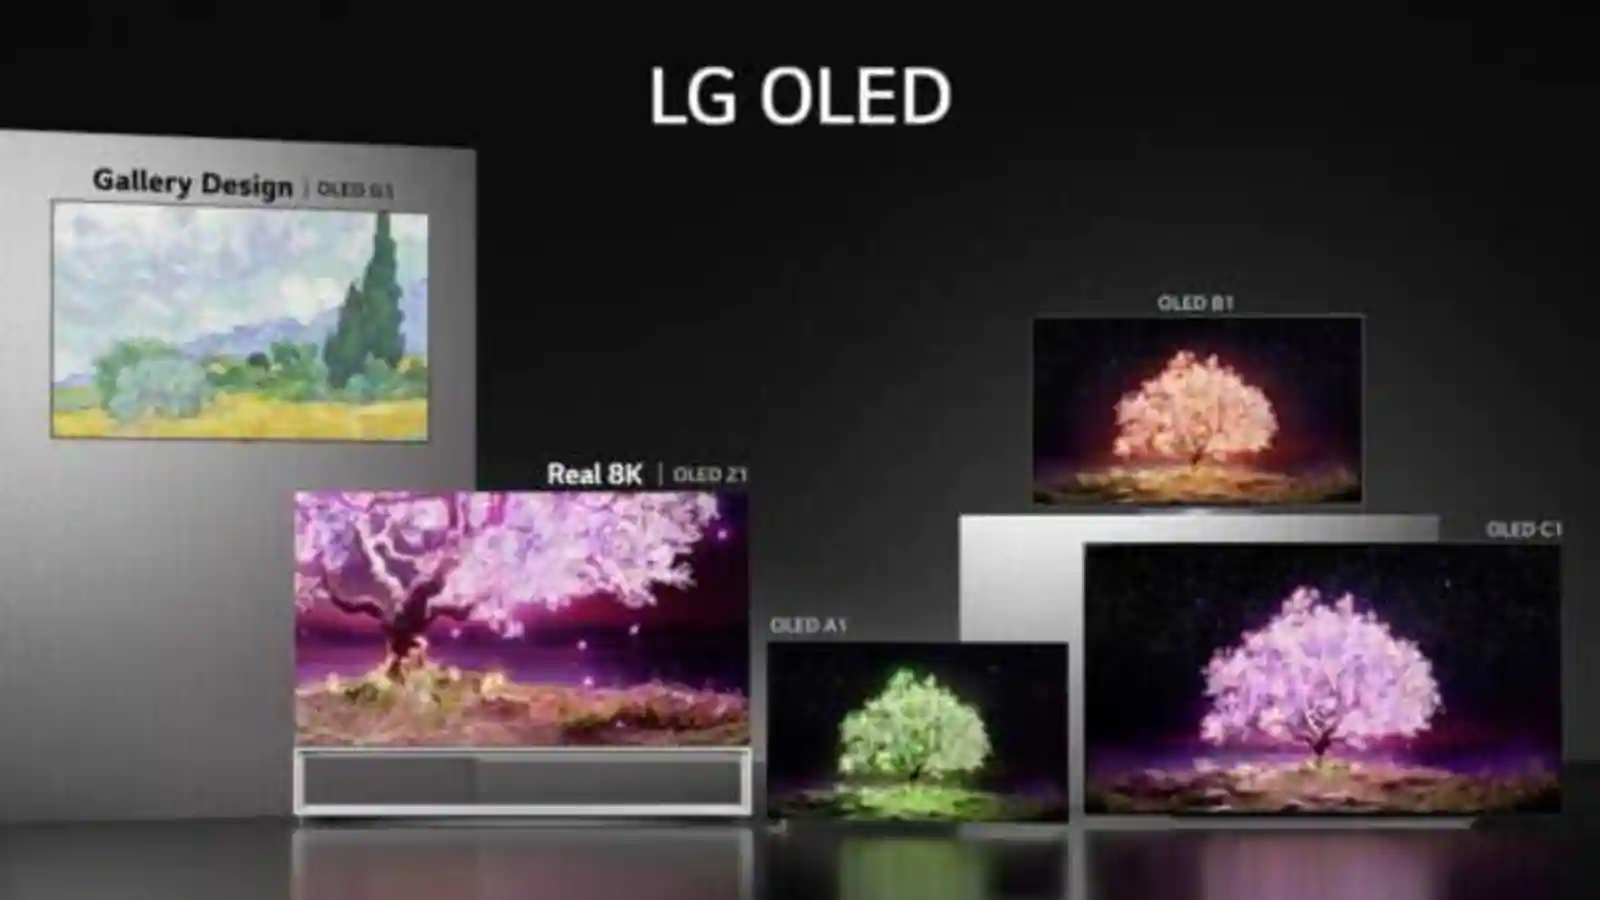 New Lineup Offers Best-In-Class Picture Quality with OLED evo, Large Range of Screen Sizes, Customizable Viewing Experience ENGLEWOOD CLIFFS, N.J., March 21, 2022 /PRNewswire/ -- LG Electronics USA announced pricing and availability of its highly anticipated 2022 OLED TV lineup. Widely praised for their outstanding picture quality, enhanced performance and sleek designs, LG's latest OLED TVs – the LG OLED evo G2 Gallery Edition, and LG OLED evo C2 Series are available now at LG.com and at LG-authorized retailers nationwide in April. A pioneer and global leader in OLED technology, LG has been constantly perfecting and elevating the technology, securing its position as the world's #1 OLED TV brand for nine consecutive years.1 Featuring the company's critically-acclaimed self-lit OLED technology, LG 2022 OLED TVs leverage precise pixel-level control to deliver the deepest blacks, incredibly realistic colors, and an infinite contrast ratio. Moreover, the new models have even more smart features for a personalized viewing experience. LG OLED evo Featuring LG's most advanced OLED panel and the new α (Alpha) 9 Gen 5 intelligent processor, including brightness booster technology, LG's evo technology is built into the 2022 G2 series (LG OLED evo Gallery Edition) and C2 series, taking the home entertainment experience to new heights. Models from both series have been recognized with CES 2022 Innovation Awards for raising the bar with their excellent performance.2 LG OLED evo technology, offers higher brightness, clarity and detail, for lifelike images that almost jump off the screen. Brightness is enhanced even further by the new Brightness Booster Max (G2 series) and Brightness Booster (C2 series) features, which are enabled by the increased processing power of the α9 Gen 5.3 Widest Range of Screen Sizes Ever LG's 2022 OLED TV lineup also welcomes new screen sizes and stylish designs to give consumers more choice. In addition to the world's first 97-inch OLED TV and a new 83-inch model, the G2 series provides 77-, 65- and 55-inch options, ensuring the right size for practically any space in the home. The G2 series' refined Gallery Design lets users mount the TVs flush to the wall for a seamless, sophisticated look and better spatial integration in the viewing environment. LG's C2 series offers the most screen sizes of the 2022 lineup with a total of six. Ideal as a smaller room TV or for those who enjoy console and PC gaming, the first-ever 42-inch OLED TV adds to the C2 series' broad range of 83-, 77-, 65-, 55- and 48-inch models. New for this year, the upgraded C2 series features thinner bezels that help deliver more immersive viewing experiences and an elegantly slender design. LG α9 Gen 5 Intelligent Processor The new and improved LG α9 Gen 5 intelligent processor employs a deep-learning algorithm to enhance the upscaling performance of the latest OLEDs, giving images a more three-dimensional quality by making onscreen elements more distinct from one another. Equipped in G2, C2 and Z2 (8K) series models, the α9 Gen 5 also boasts the new Dynamic Tone-mapping Pro Algorithm, which individually processes over 5,000 areas on the screen, enhancing each to produce a more vivid and detailed image, in both brighter and darker parts of the picture. LG's latest processor also boosts audio quality via the AI Sound Pro feature, enabling the TVs' built-in speakers to produce virtual 7.1.2 surround. Completing the 2022 OLED TV U.S. line-up are B2 OLED TV series in three screen sizes (77-inch, 65-inch, 55-inch) and A2 series in two screen sizes 65-inch, 55-inch), both powered by the company's self-lit technology, α7 Gen 5 processor with Dynamic Tone-mapping, AI Sound Pro and virtual 5.1.2 surround sound. Upgraded UX LG's 2022 OLED TVs come with webOS 22, the newest version of LG's innovative Smart TV platform. webOS 22 offers a number of new personalization options, including customizable user profiles that allow each member of the household to tailor their viewing experience and enjoy easier access to their preferred channels, apps and content services. webOS22 also provides exceptional convenience with features such as NFC Magic Tap which allows for a simple way to mirror screen from mobile to TV,4 Room To Room Share, which allows for cable or satellite content mirroring via Wi-Fi from one TV to another in the home, so there's no need for an additional set-top-box on the second TV,5 and Always Ready which turns an LG TV into a media display when not in use. LG's webOS22 platform will also feature an updated LG Channels experience with over 350 FREE ad-supported channels including the NCAA Channel, exclusive to LG Channels featuring up to 50 NCAA Fall, Winter and Spring championships, both live and on-demand. Acclaimed Picture Quality LG OLED TVs continue to set the standard for picture quality. The panels used in this year's lineup have again been certified by Intertek for providing 100 percent color fidelity and 100 percent color volume – indicating that 2022 LG OLED TVs deliver accurate color reproduction, and can express every single tone and hue of the original source no matter how bright or dark the onscreen action.6 Additionally, all 2022 models are certified flicker-free by UL. Dolby Vision IQ with Precision Detail LG's latest OLEDs are the first TVs to adopt Dolby Vision IQ with Precision Detail.7 This new technology unlocks even more from Dolby Vision content, revealing detail in both bright and dark areas that were not perceivable before. And for equally immersive audio, LG's new OLED TVs deliver Dolby Atmos® spatial sound through their speaker system. Optimized for Gaming In a class of their own where PC and console gaming are concerned, LG OLED TVs offer a 0.1 millisecond response time (GtG), low input lag and up to four HDMI ports supporting multiple HDMI 2.1 features. Seamless cloud gaming is also available on LG OLED via built-in support for Google Stadia and GeForce NOW. With the Game Optimizer menu on LG OLED, users will enjoy being able to quickly select or switch between specialized gaming features and presets. The new Dark Room Mode, which adjusts screen brightness for a better gaming experience with the lights off, can also be selected via Game Optimizer, as can settings for G-SYNC® Compatible, FreeSync™ Premium and variable refresh rate (VRR). New for 2022, LG's display presets for various game genres adds a sports mode, joining the previously available options of first-person shooter, role-playing, and real-time strategy. For more information on LG's 2022 OLED TVs, visit LG.com. 1 Units shipped in the 9-year period, 2013-2021 (Source: Omdia). 2 2022 CES Innovation Awards Honorees include models 97-inch G2, 83-inch G2, 42-inch C2, 48-inch C2 and 83-inch C2. 3 Brightness Booster applies for large sized models 83-inch C2, 77-inch C2, 65-inch C2 and 55-inch C2. 4 NFT Screen mirroring supported in Z2, G2 and C2 series, on compatible Android and iOS devices. Functionality varies per country. 5 Room To Room Share supports content from set-top boxes and terrestrial broadcasts only. Main TV (Content Sender): Z2, G2, C2 series. Receiver TV (Content Receiver): all 2022 new models. 6 LG OLED panel certified by Intertek for 100 percent color fidelity measured to CIE DE2000 with 125 color patterns. Certified by Intertek, LG's OLED TVs can express 100 percent of the DCI-P3 spectrum across a 3D color space that covers the TVs' full luminance range, according to IDMS 1.1 (cl. 5.32). 7Available with Z2, G2, C2 series. About LG Electronics USA LG Electronics USA, Inc., based in Englewood Cliffs, N.J., is the North American subsidiary of LG Electronics, Inc., a $63 billion global innovator in technology and manufacturing. In the United States, LG sells a wide range of innovative home appliances, home entertainment products, commercial displays, air conditioning systems, solar energy solutions and vehicle components. LG is a seven-time ENERGY STAR® Partner of the Year. The company's commitment to environmental sustainability and its "Life's Good" marketing theme encompass how LG is dedicated to people's happiness by exceeding expectations today and tomorrow. www.LG.com.